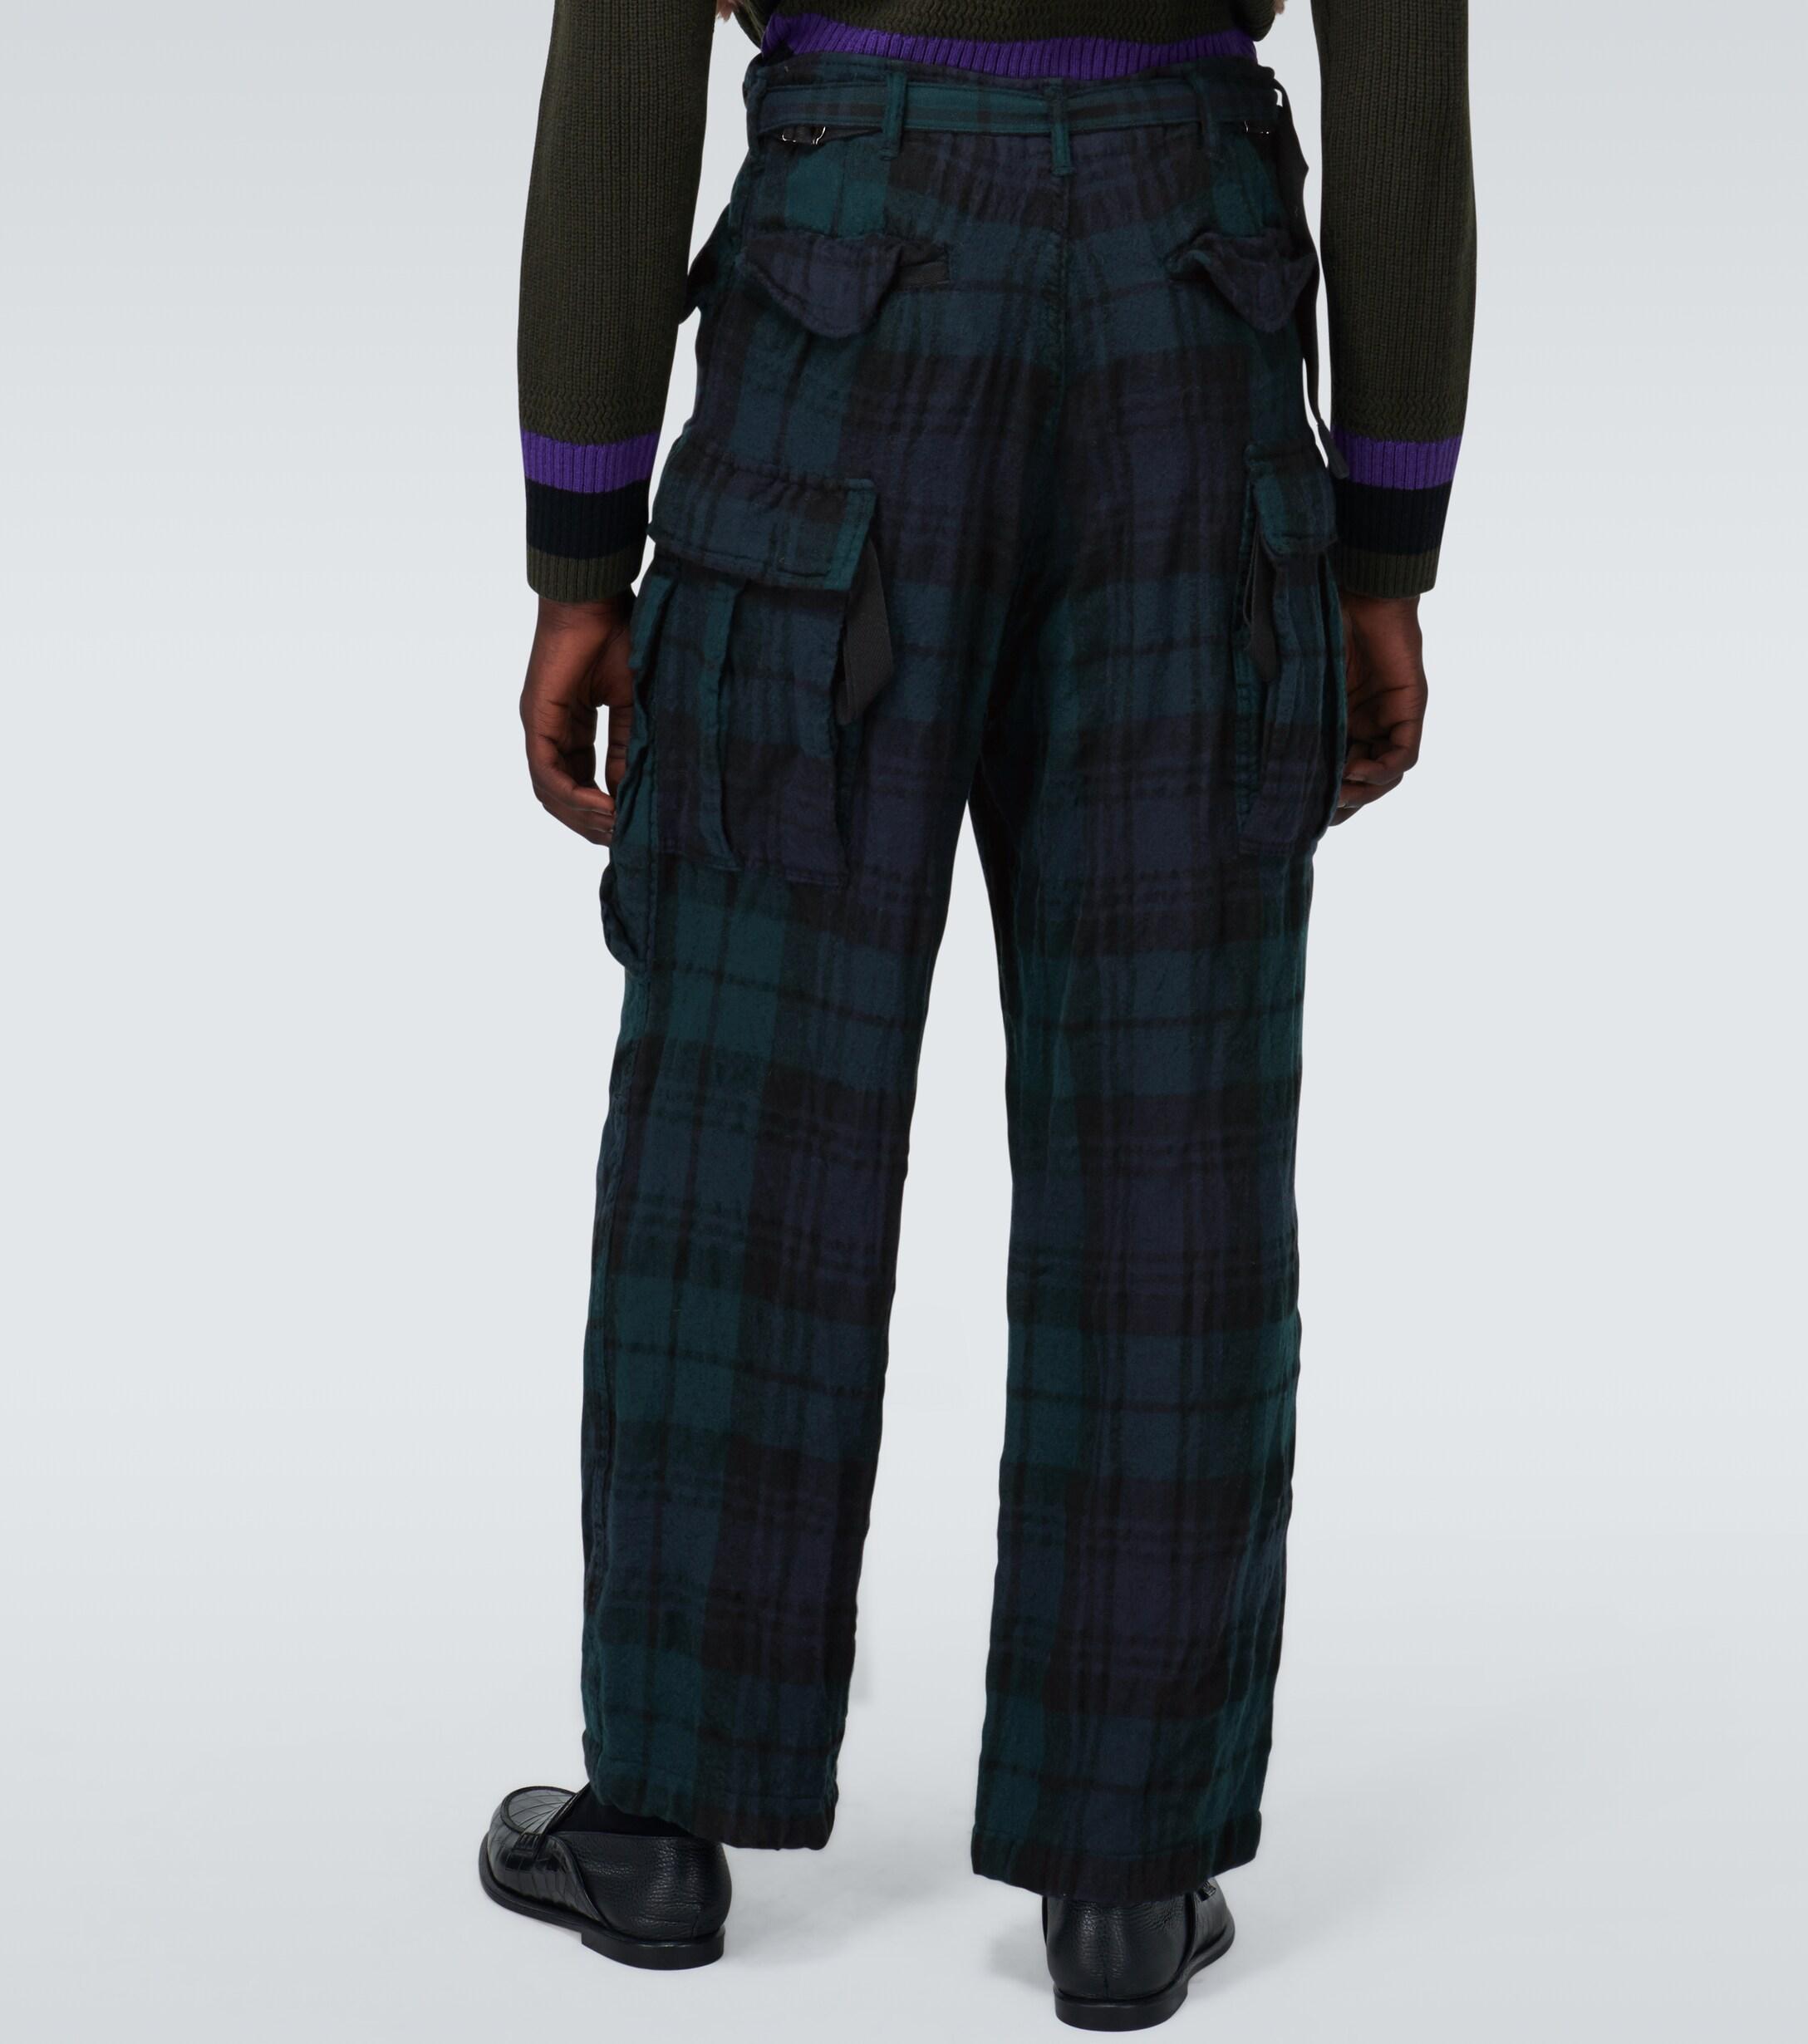 Sacai Check Shrivel Wool Cargo Pants in Green for Men - Lyst